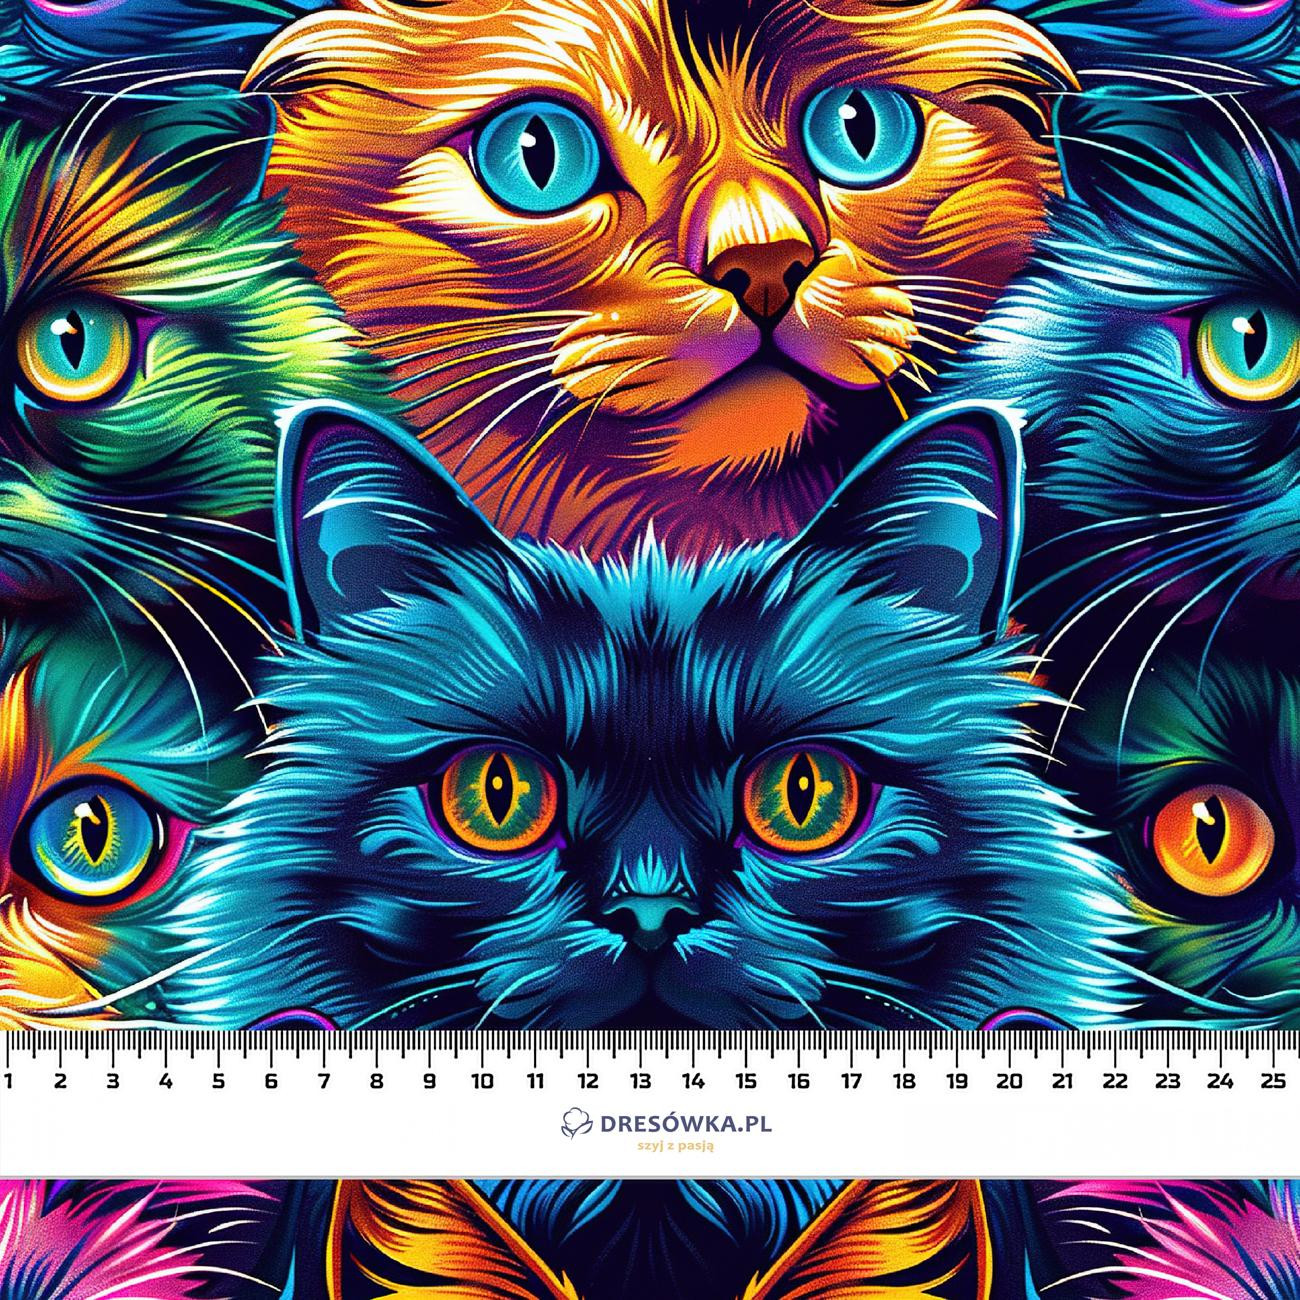 COLORFUL CATS - Hydrophobic brushed knit